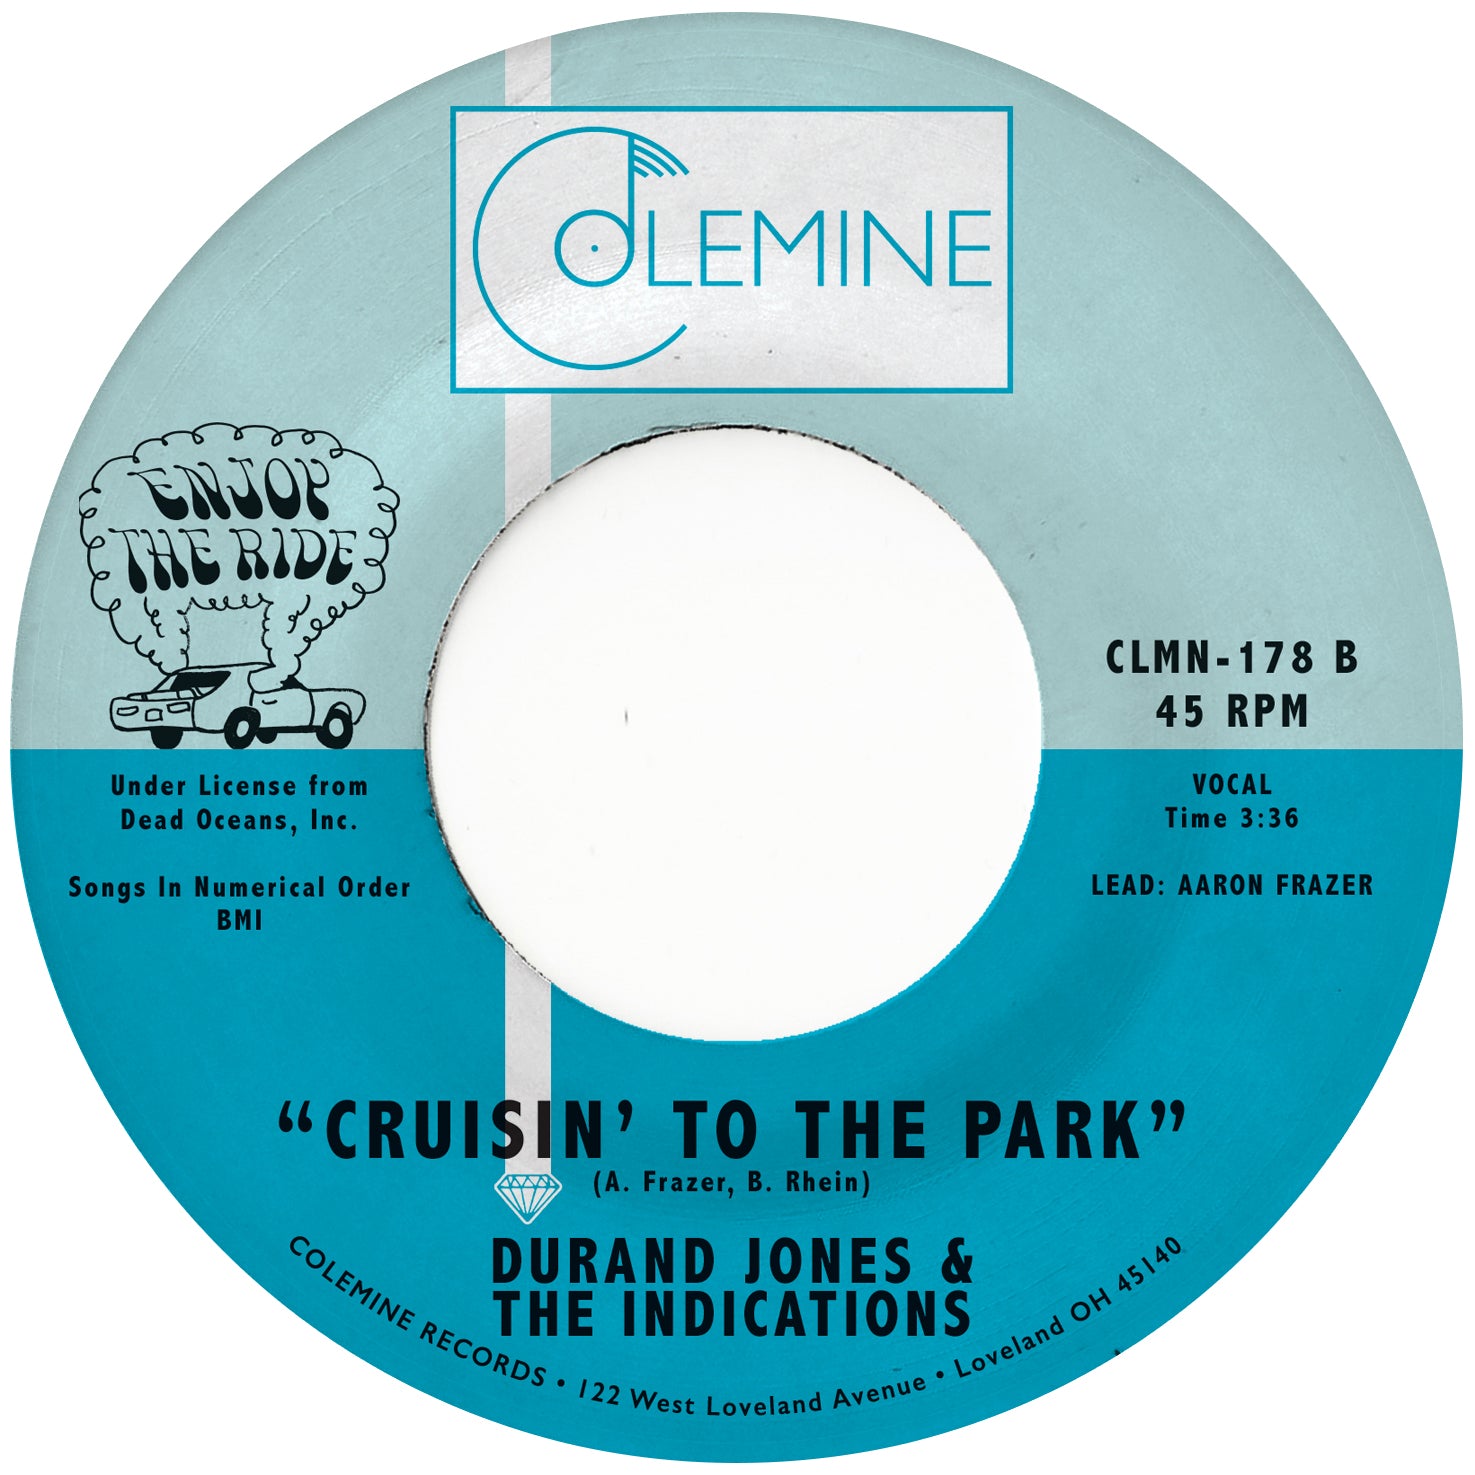 Durand Jones & The Indications - Morning in America b/w Crusin' in the Park